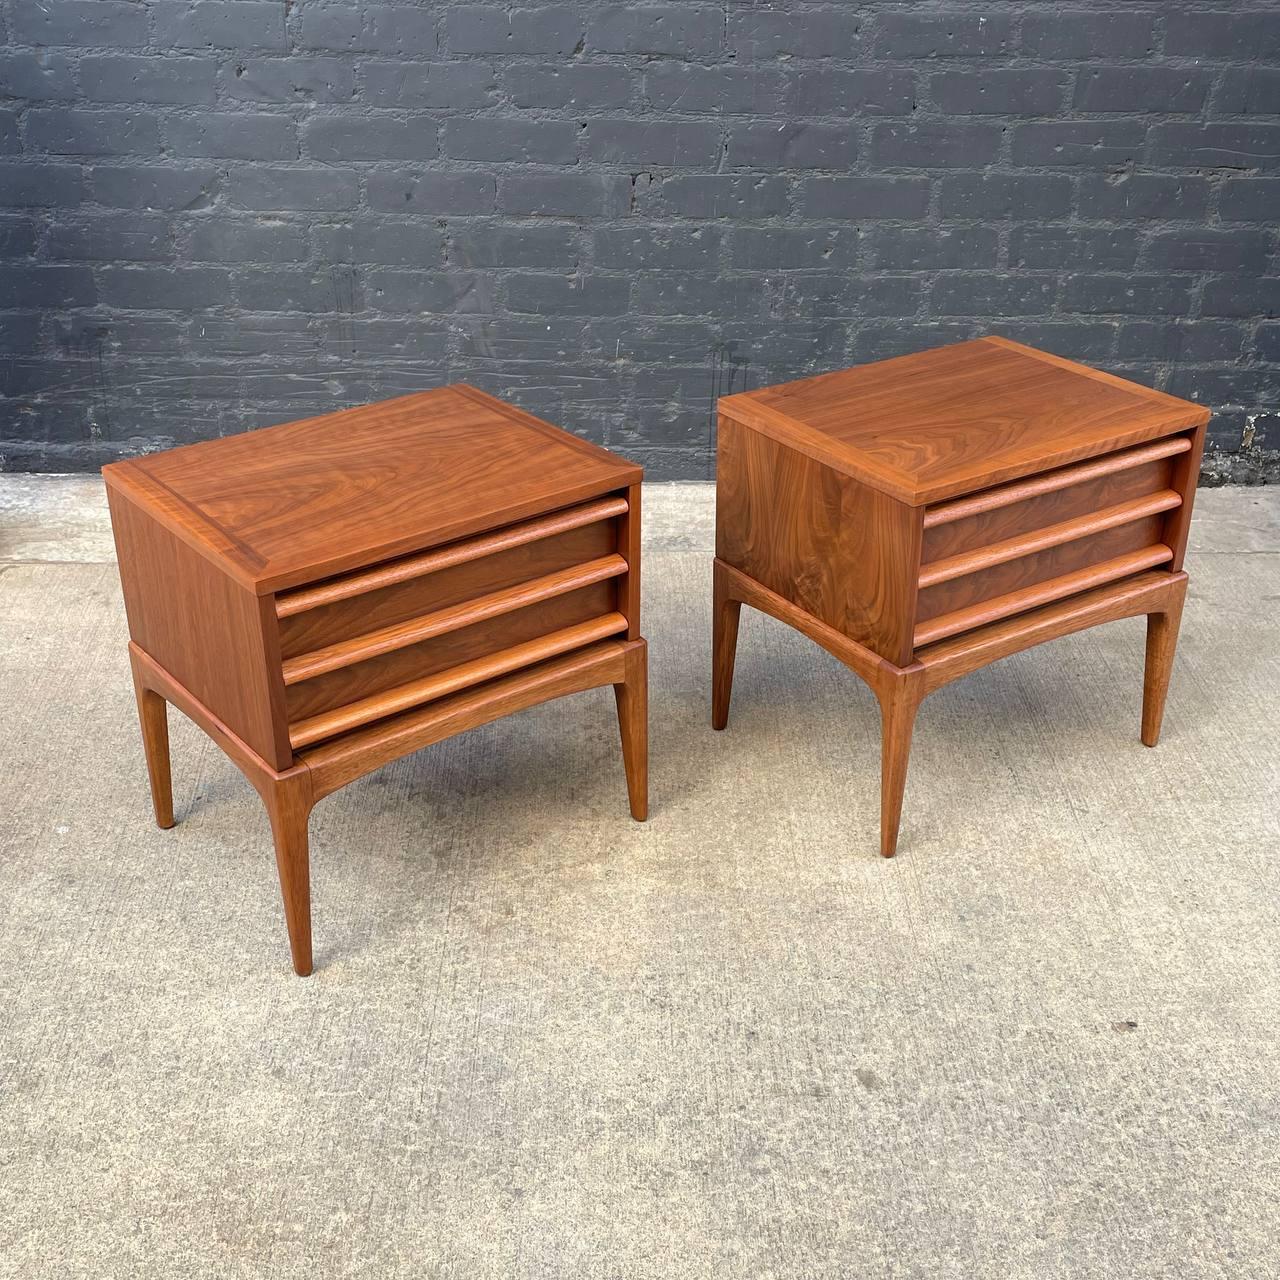 Newly Refinished Pair of Mid-Century Modern “Rhythm” Walnut Night Stands by Lane

With over 15 years of experience, our workshop has followed a careful process of restoration, showcasing our passion and creativity for vintage designs that can